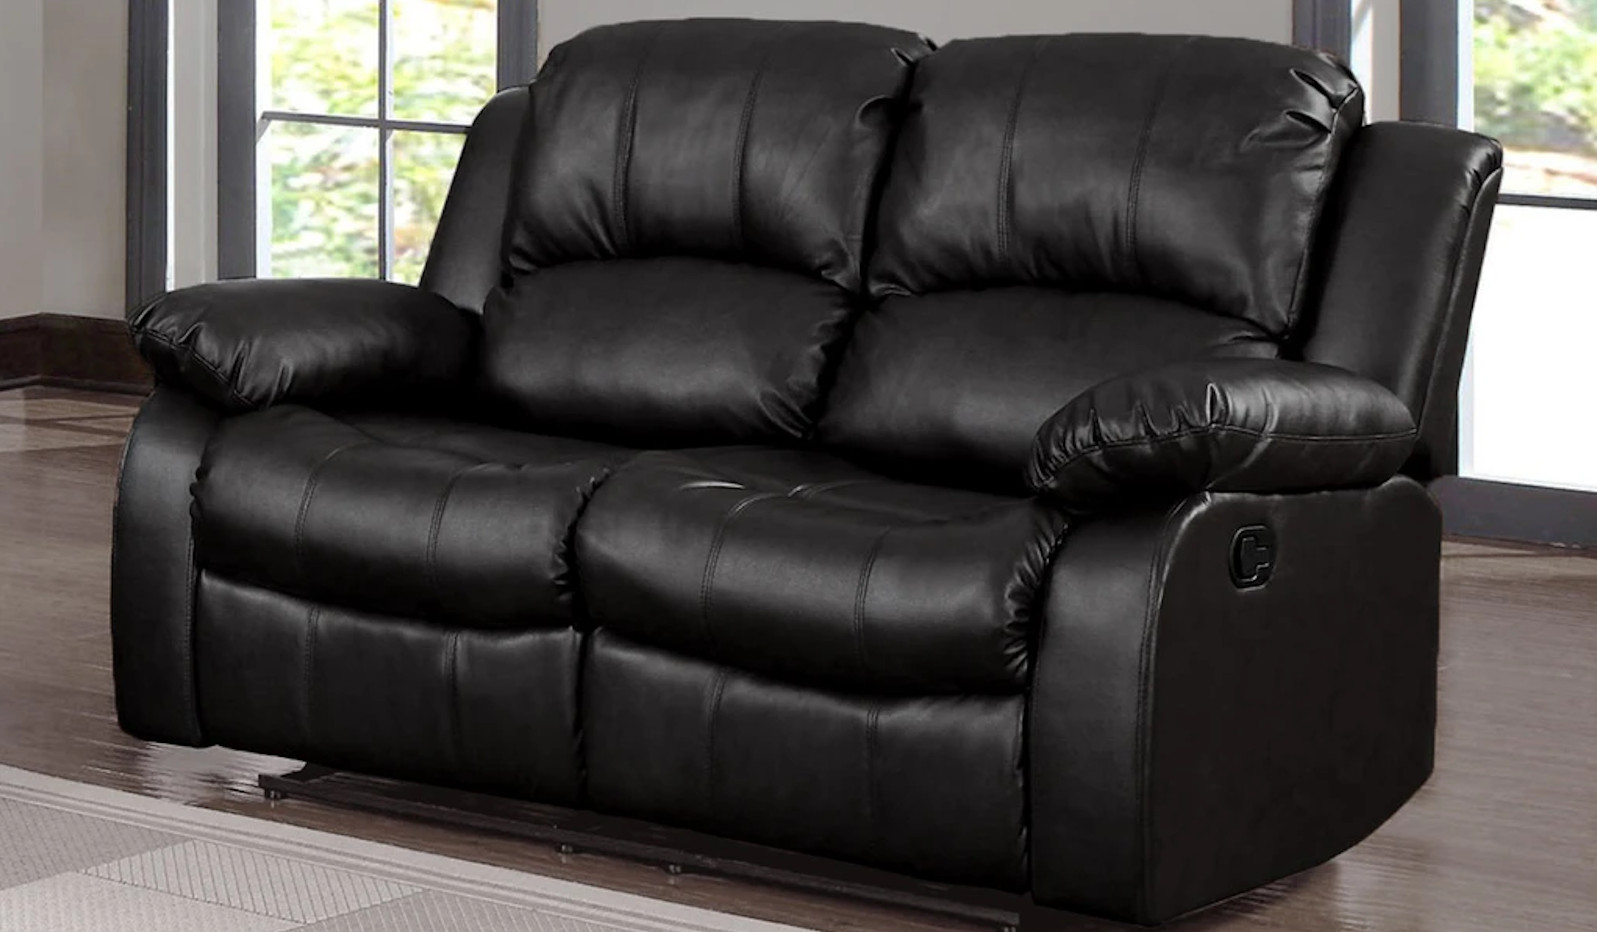 Inexpensive recliners